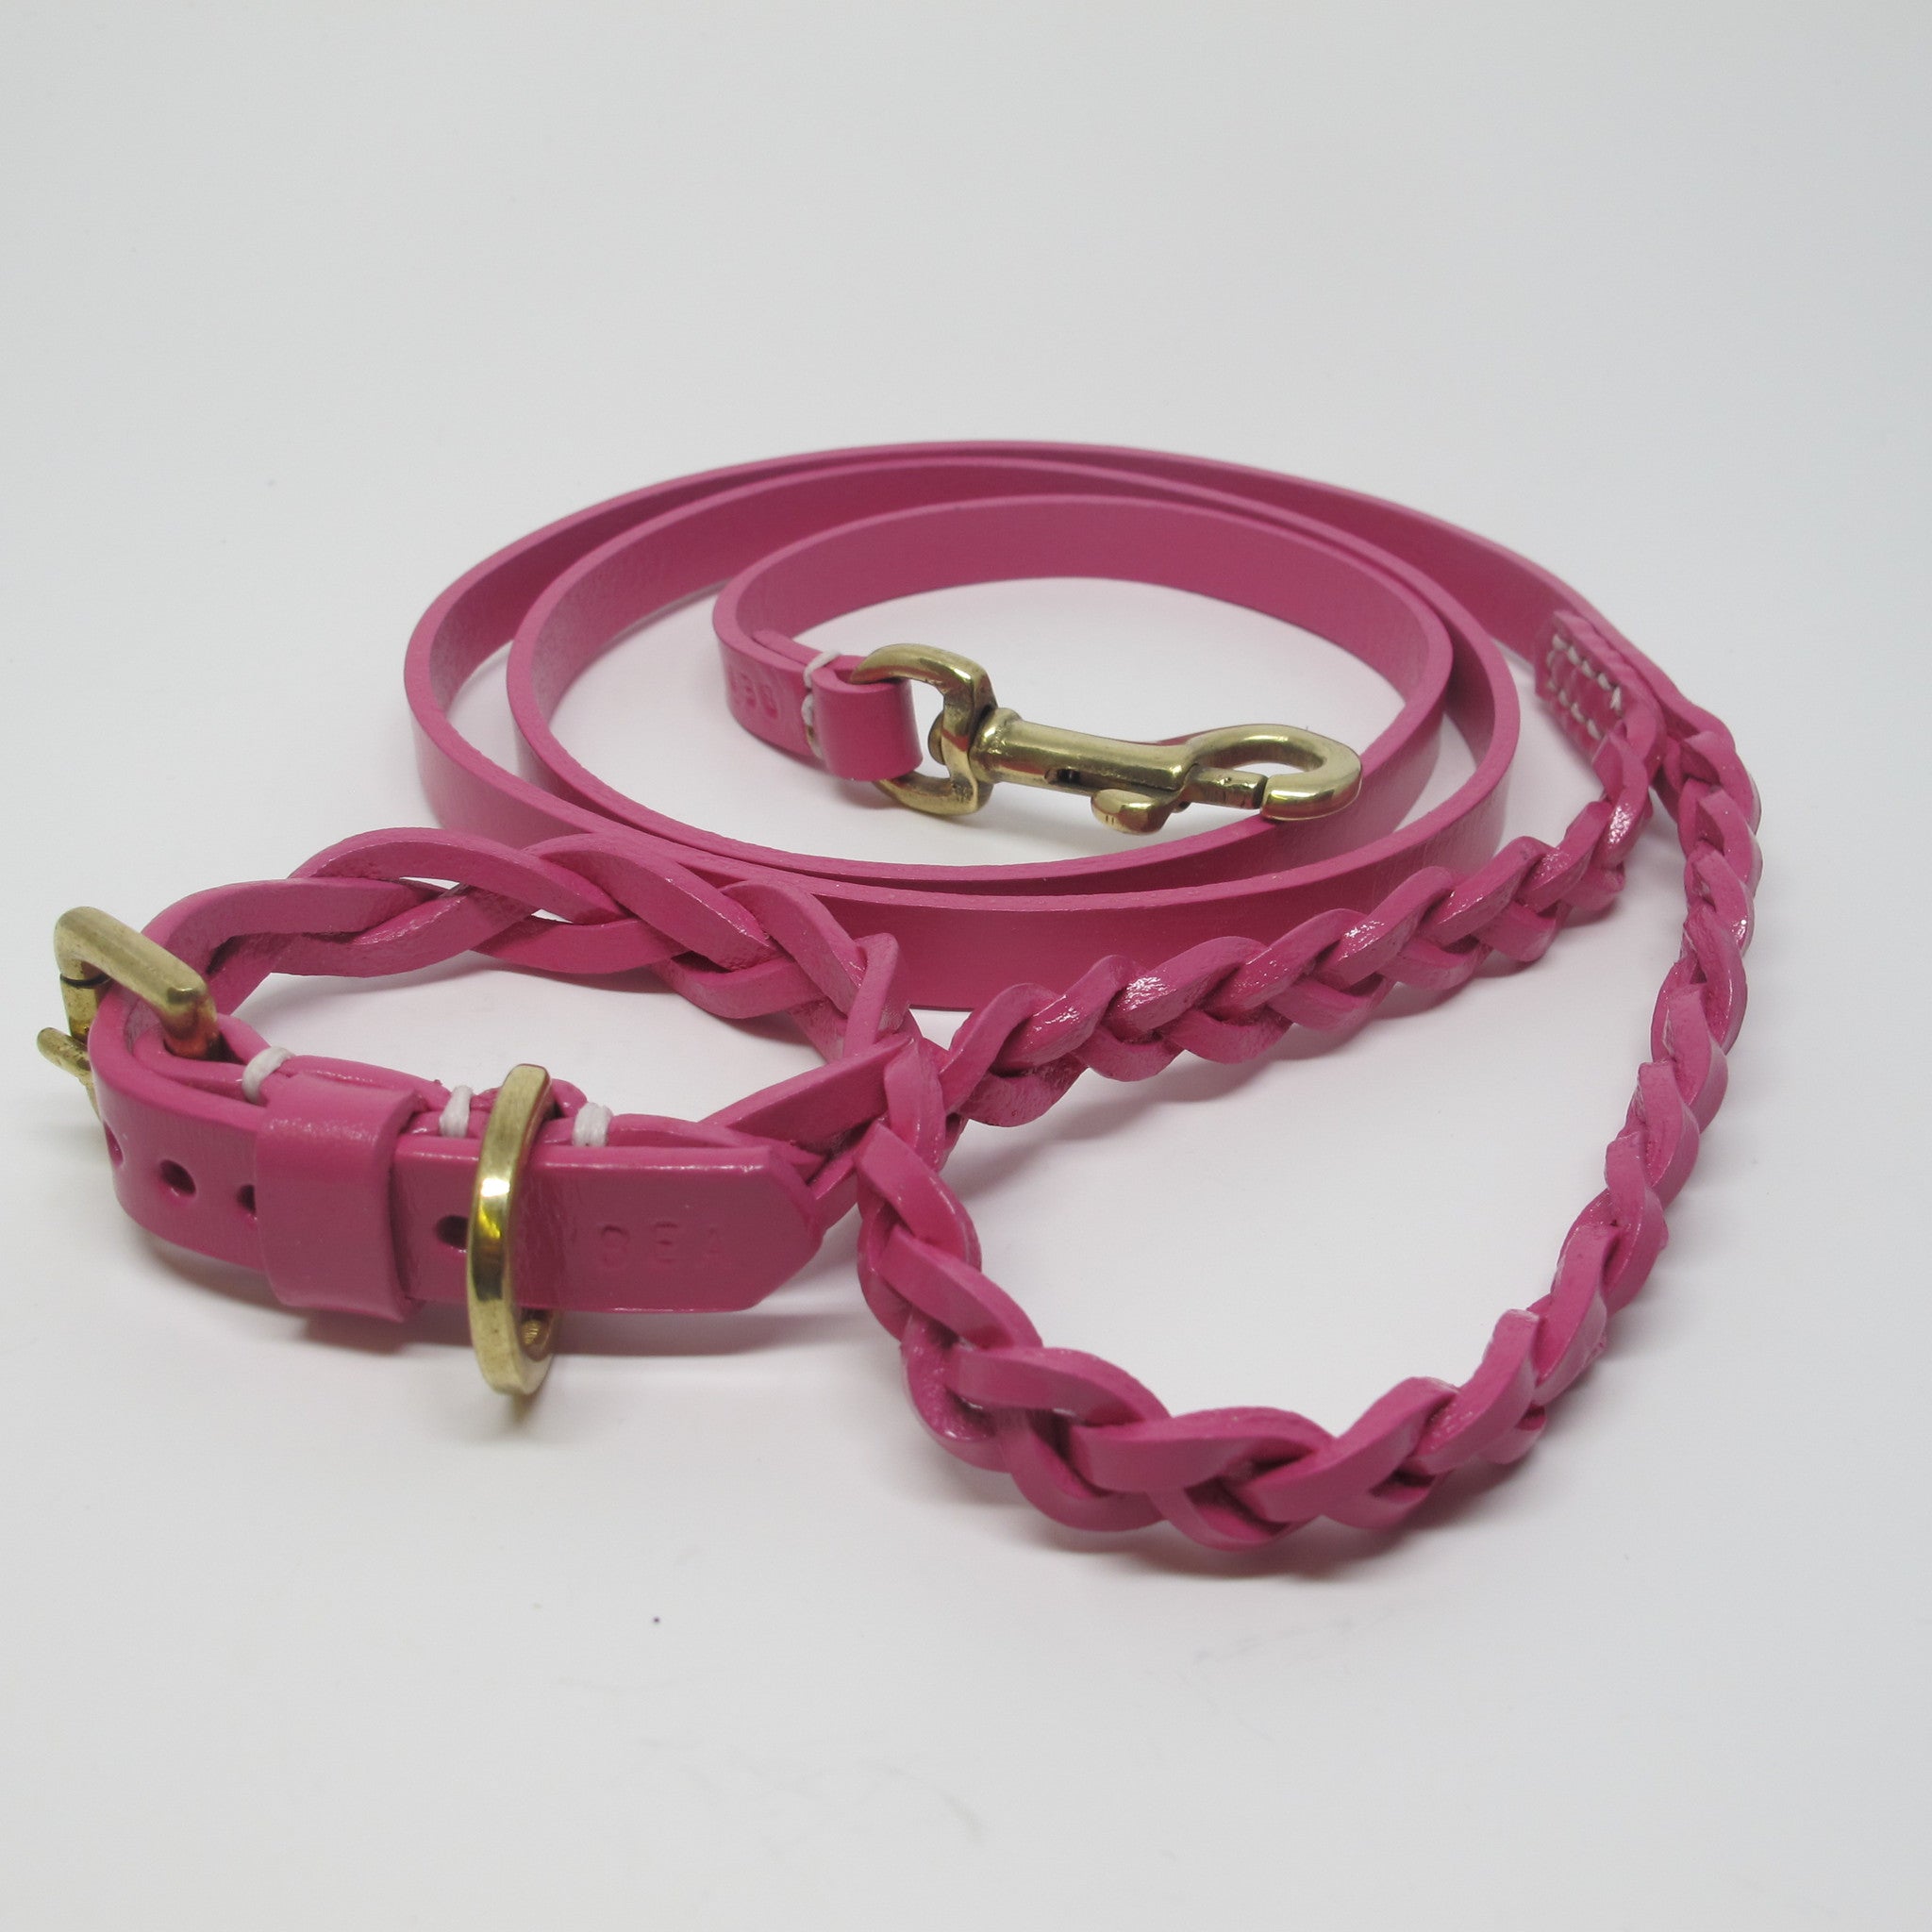 Personalised Hot Pink Plaited Leather Dog Collar and Lead Set